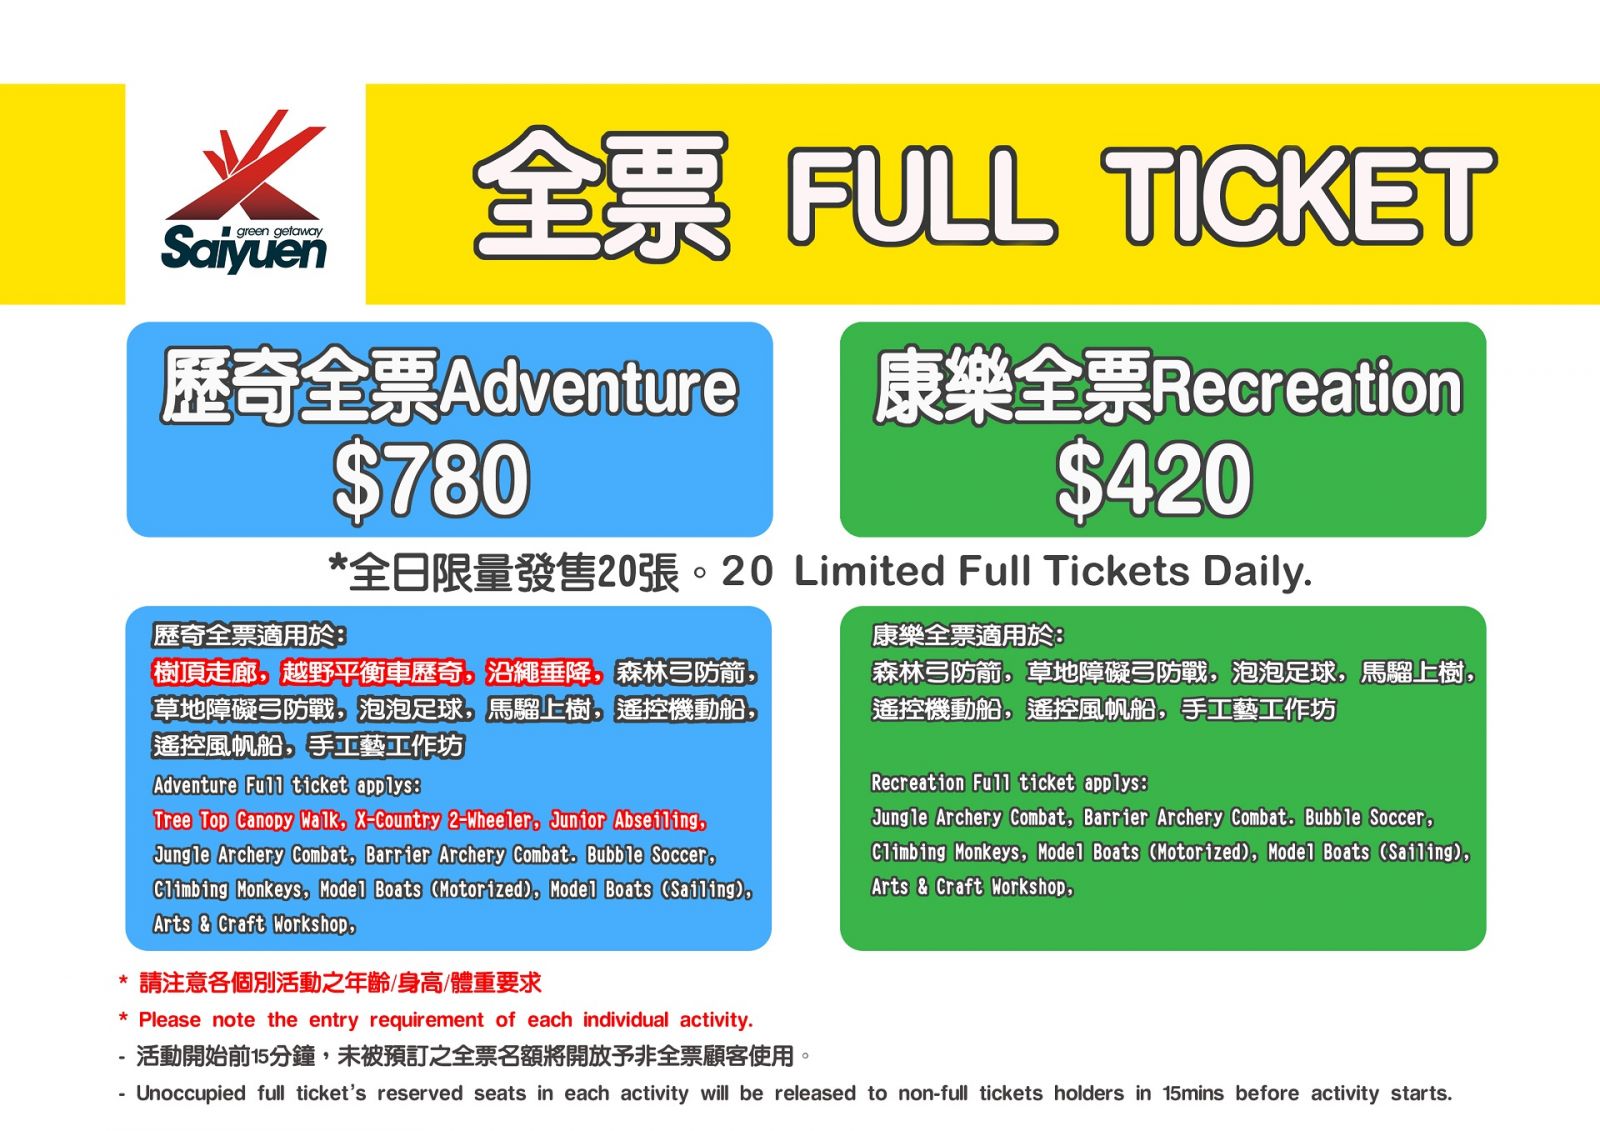 Full Ticket - Packages - Saiyuen Camping Adventure Park